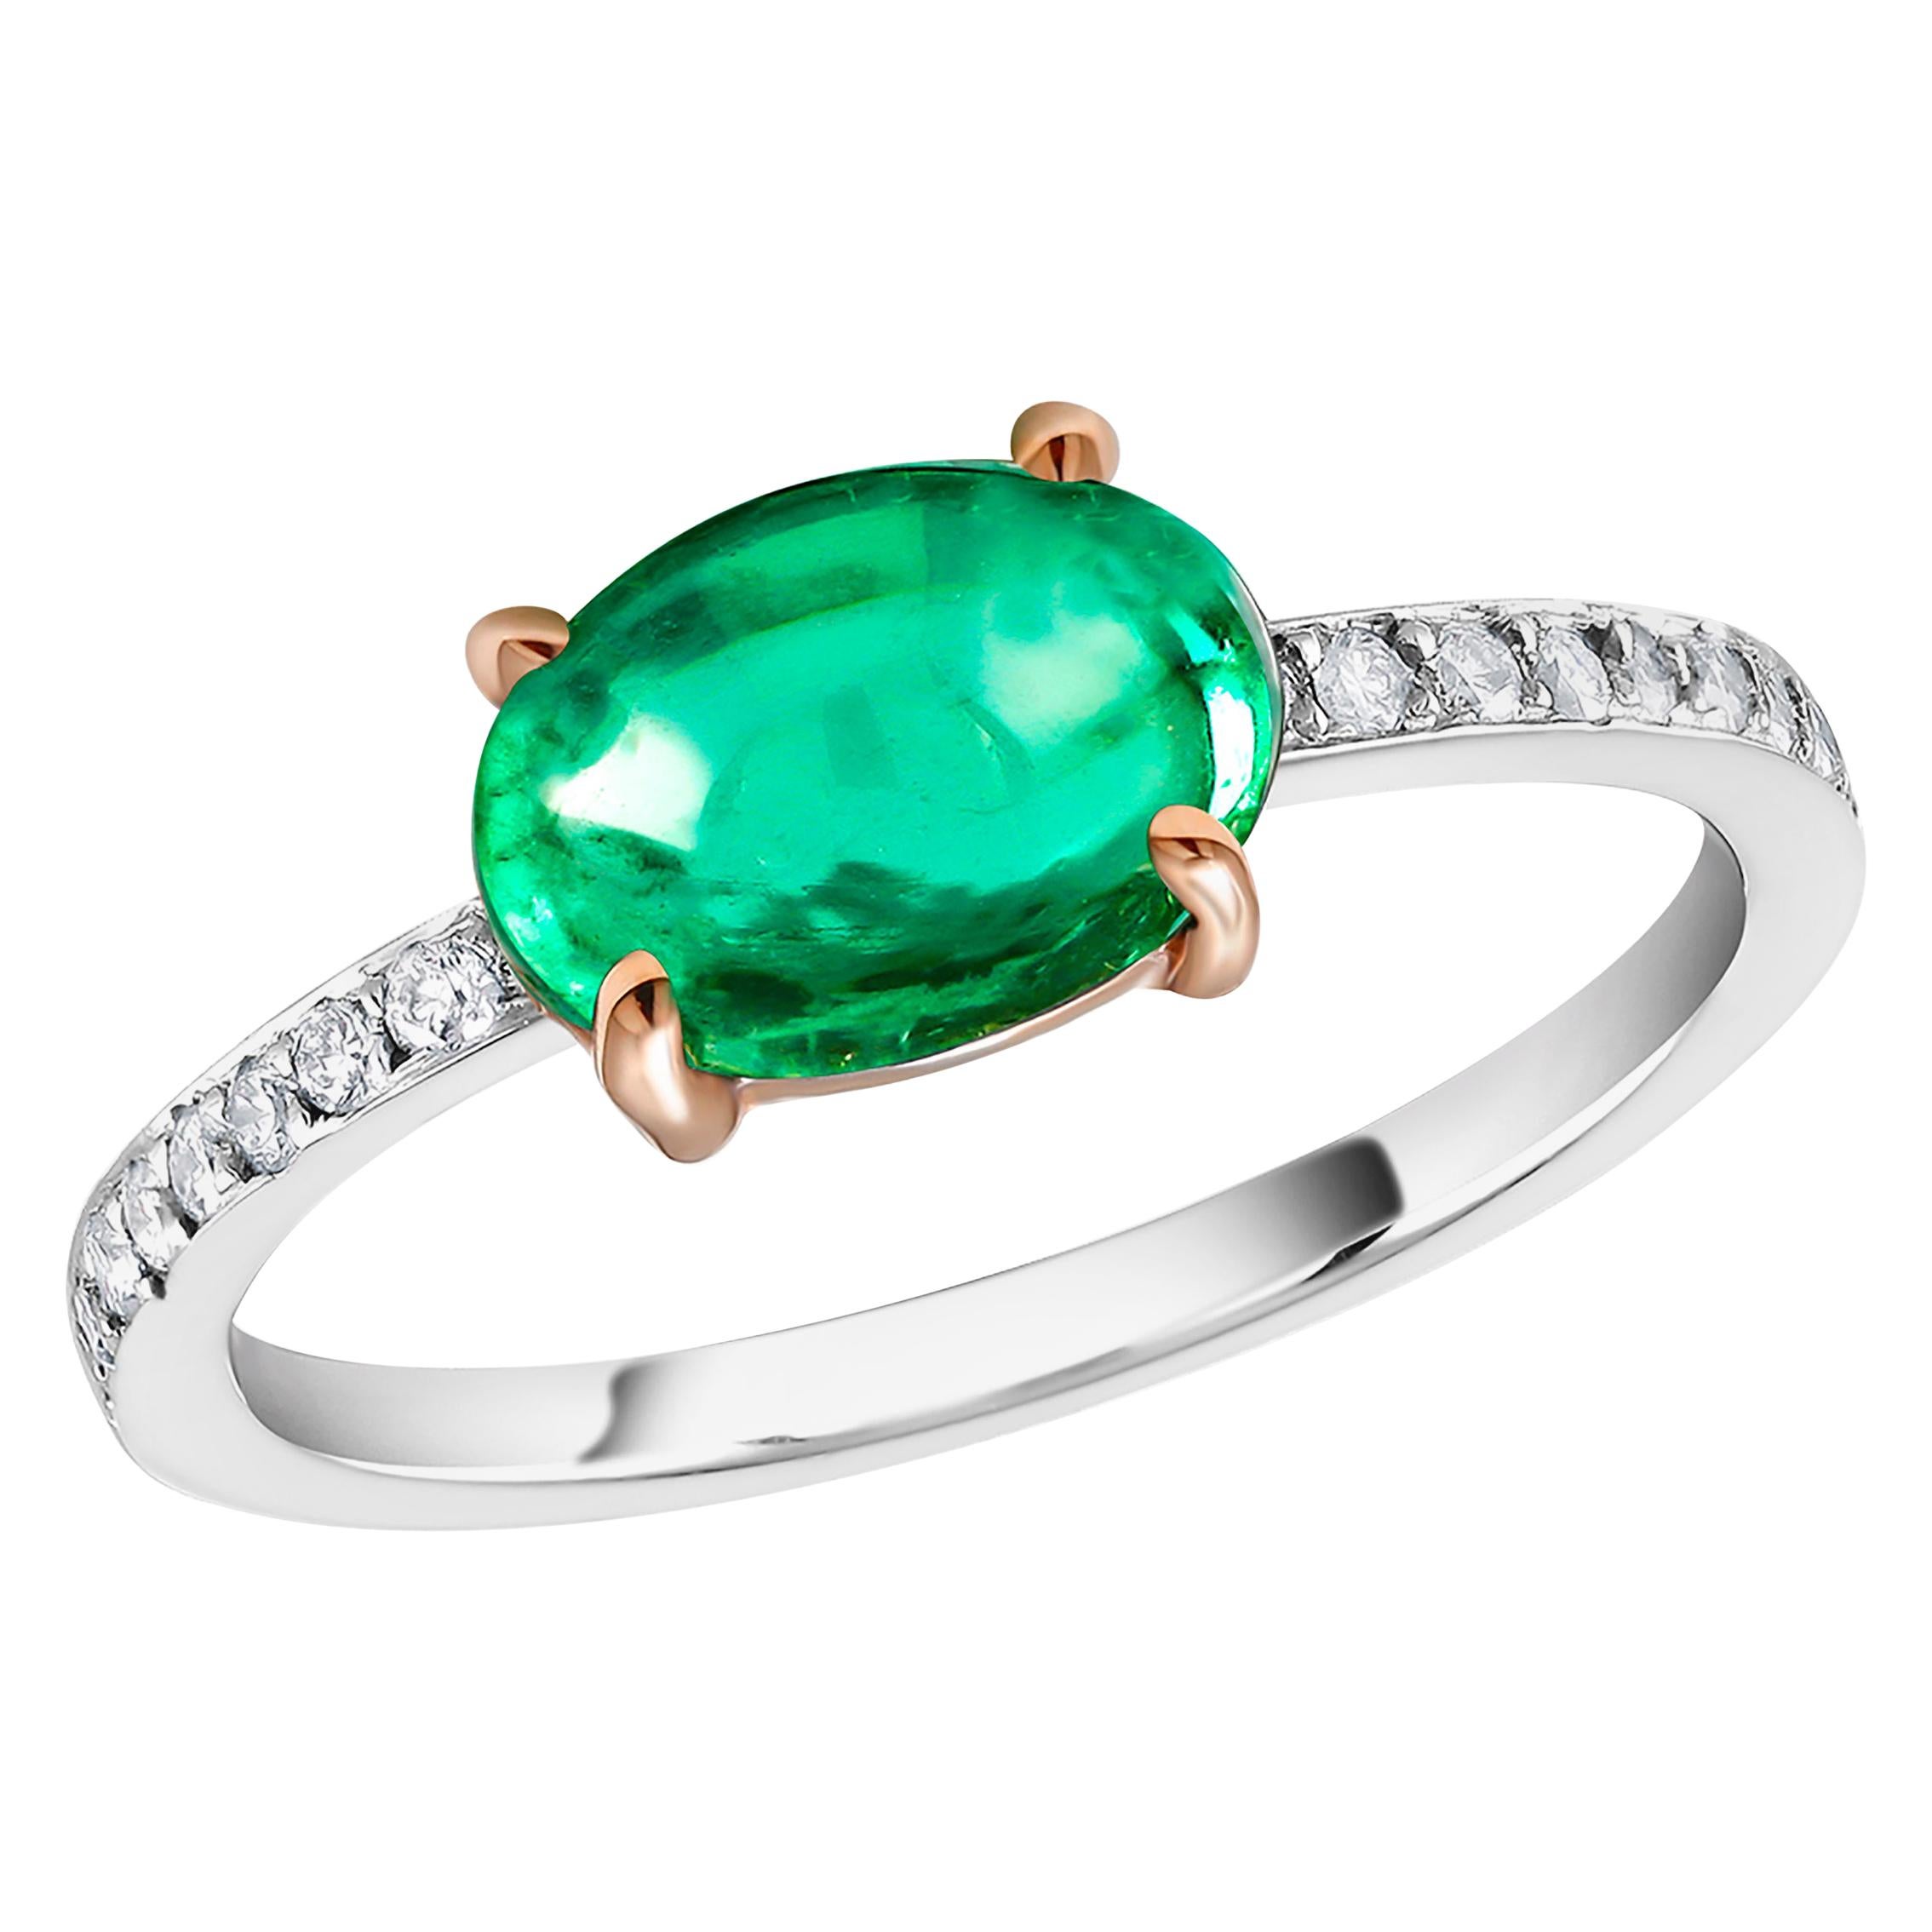 OGI Cabochon Emerald and Diamond Gold Cocktail Ring